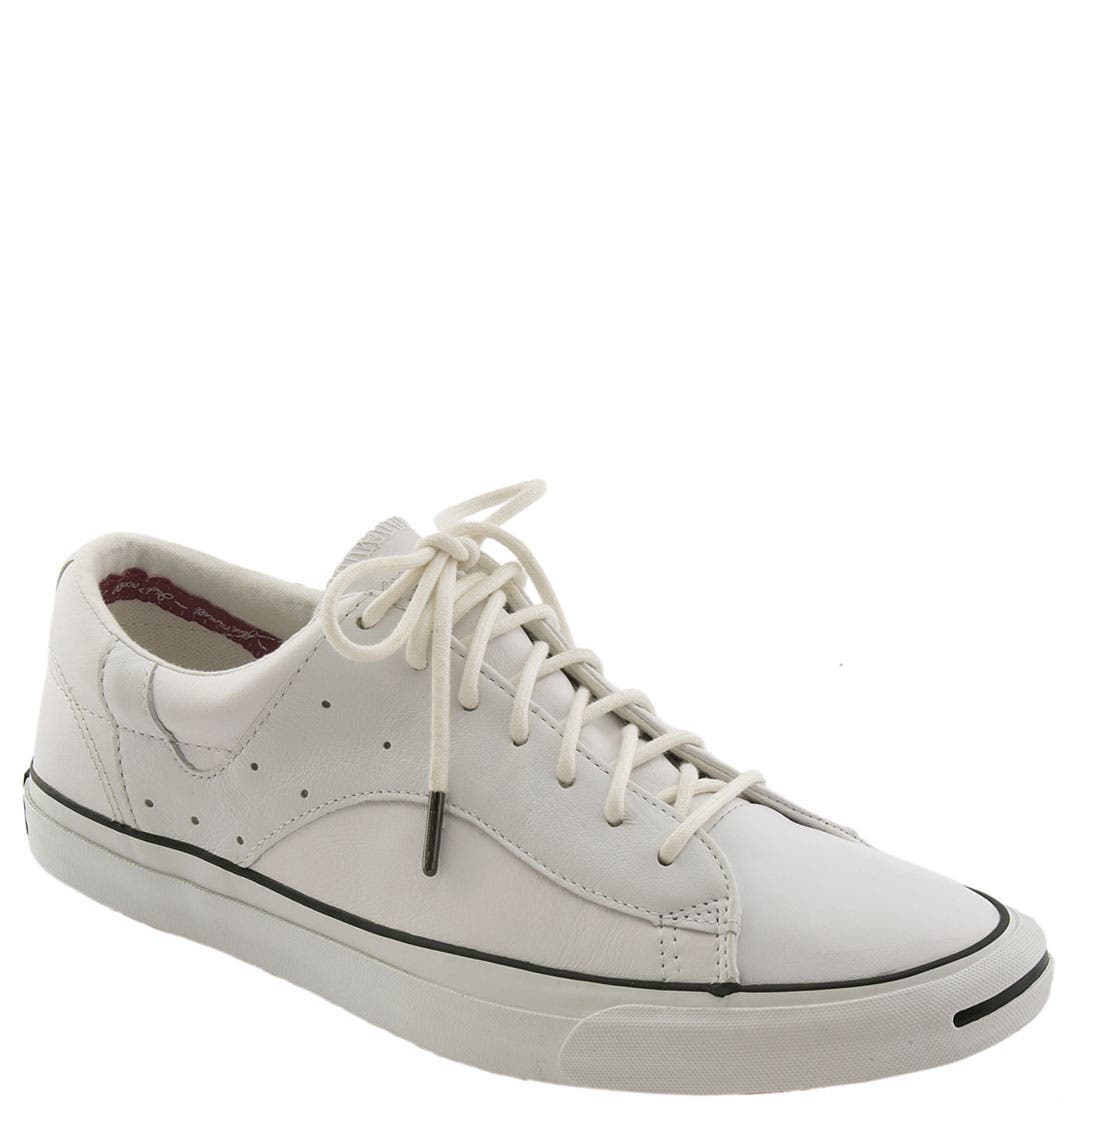 converse jack purcell race around